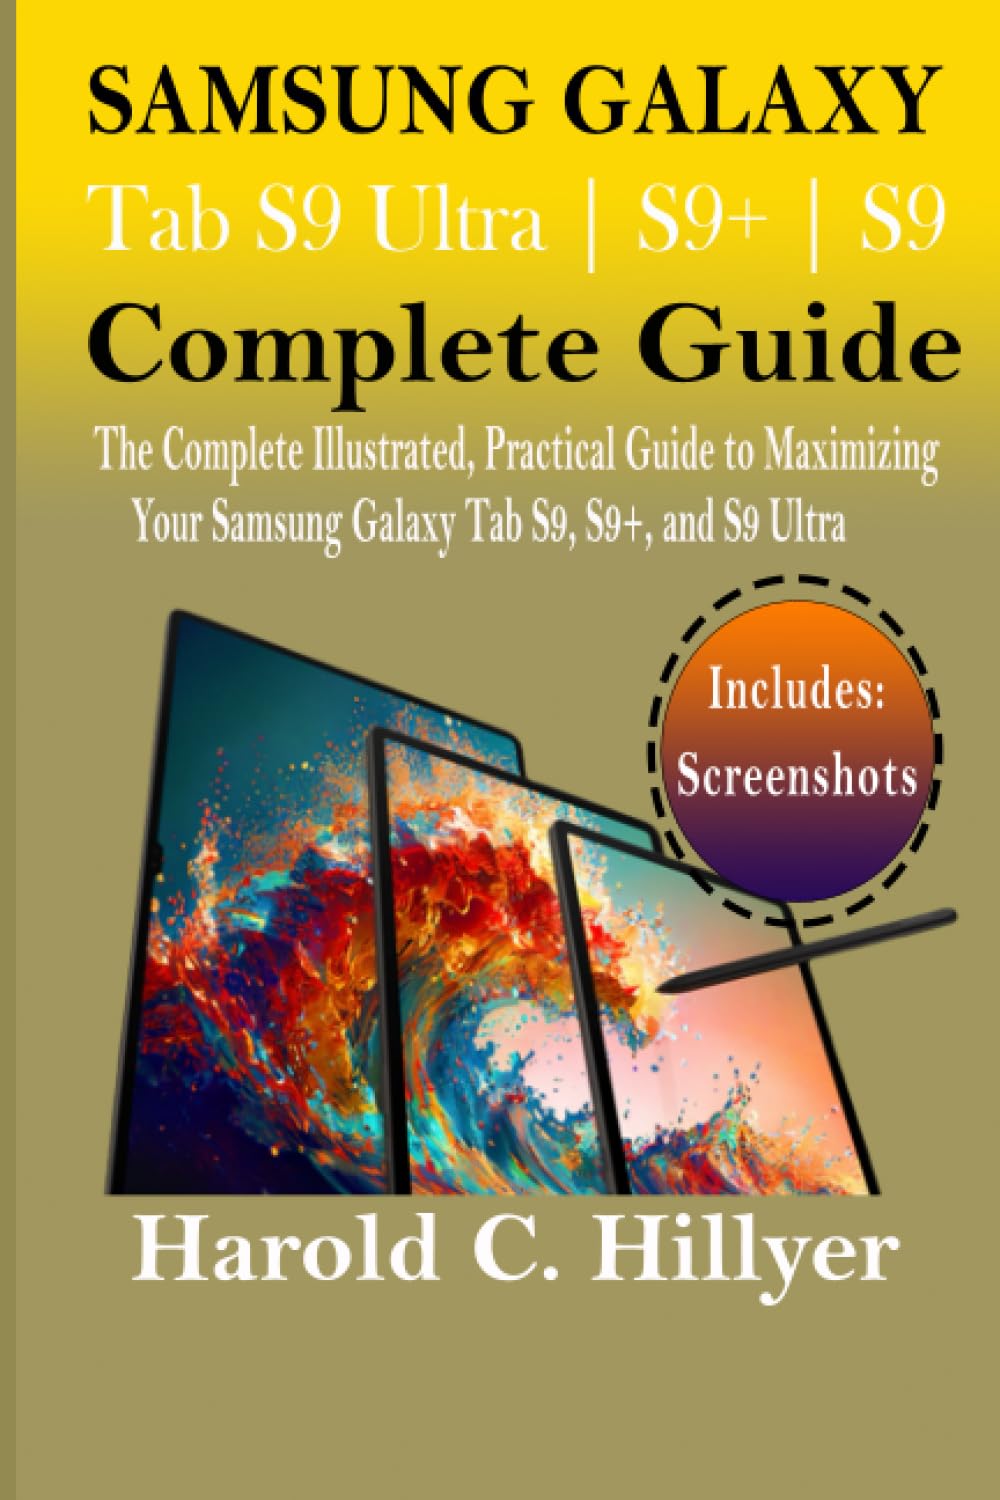 Samsung Galaxy Tab S9 Ultra | S9+ | S9 Complete Manual: The Complete Illustrated, Practical Guide to Maximizing Your Samsung Galaxy Tab S9, S9+, and S9 Ultra